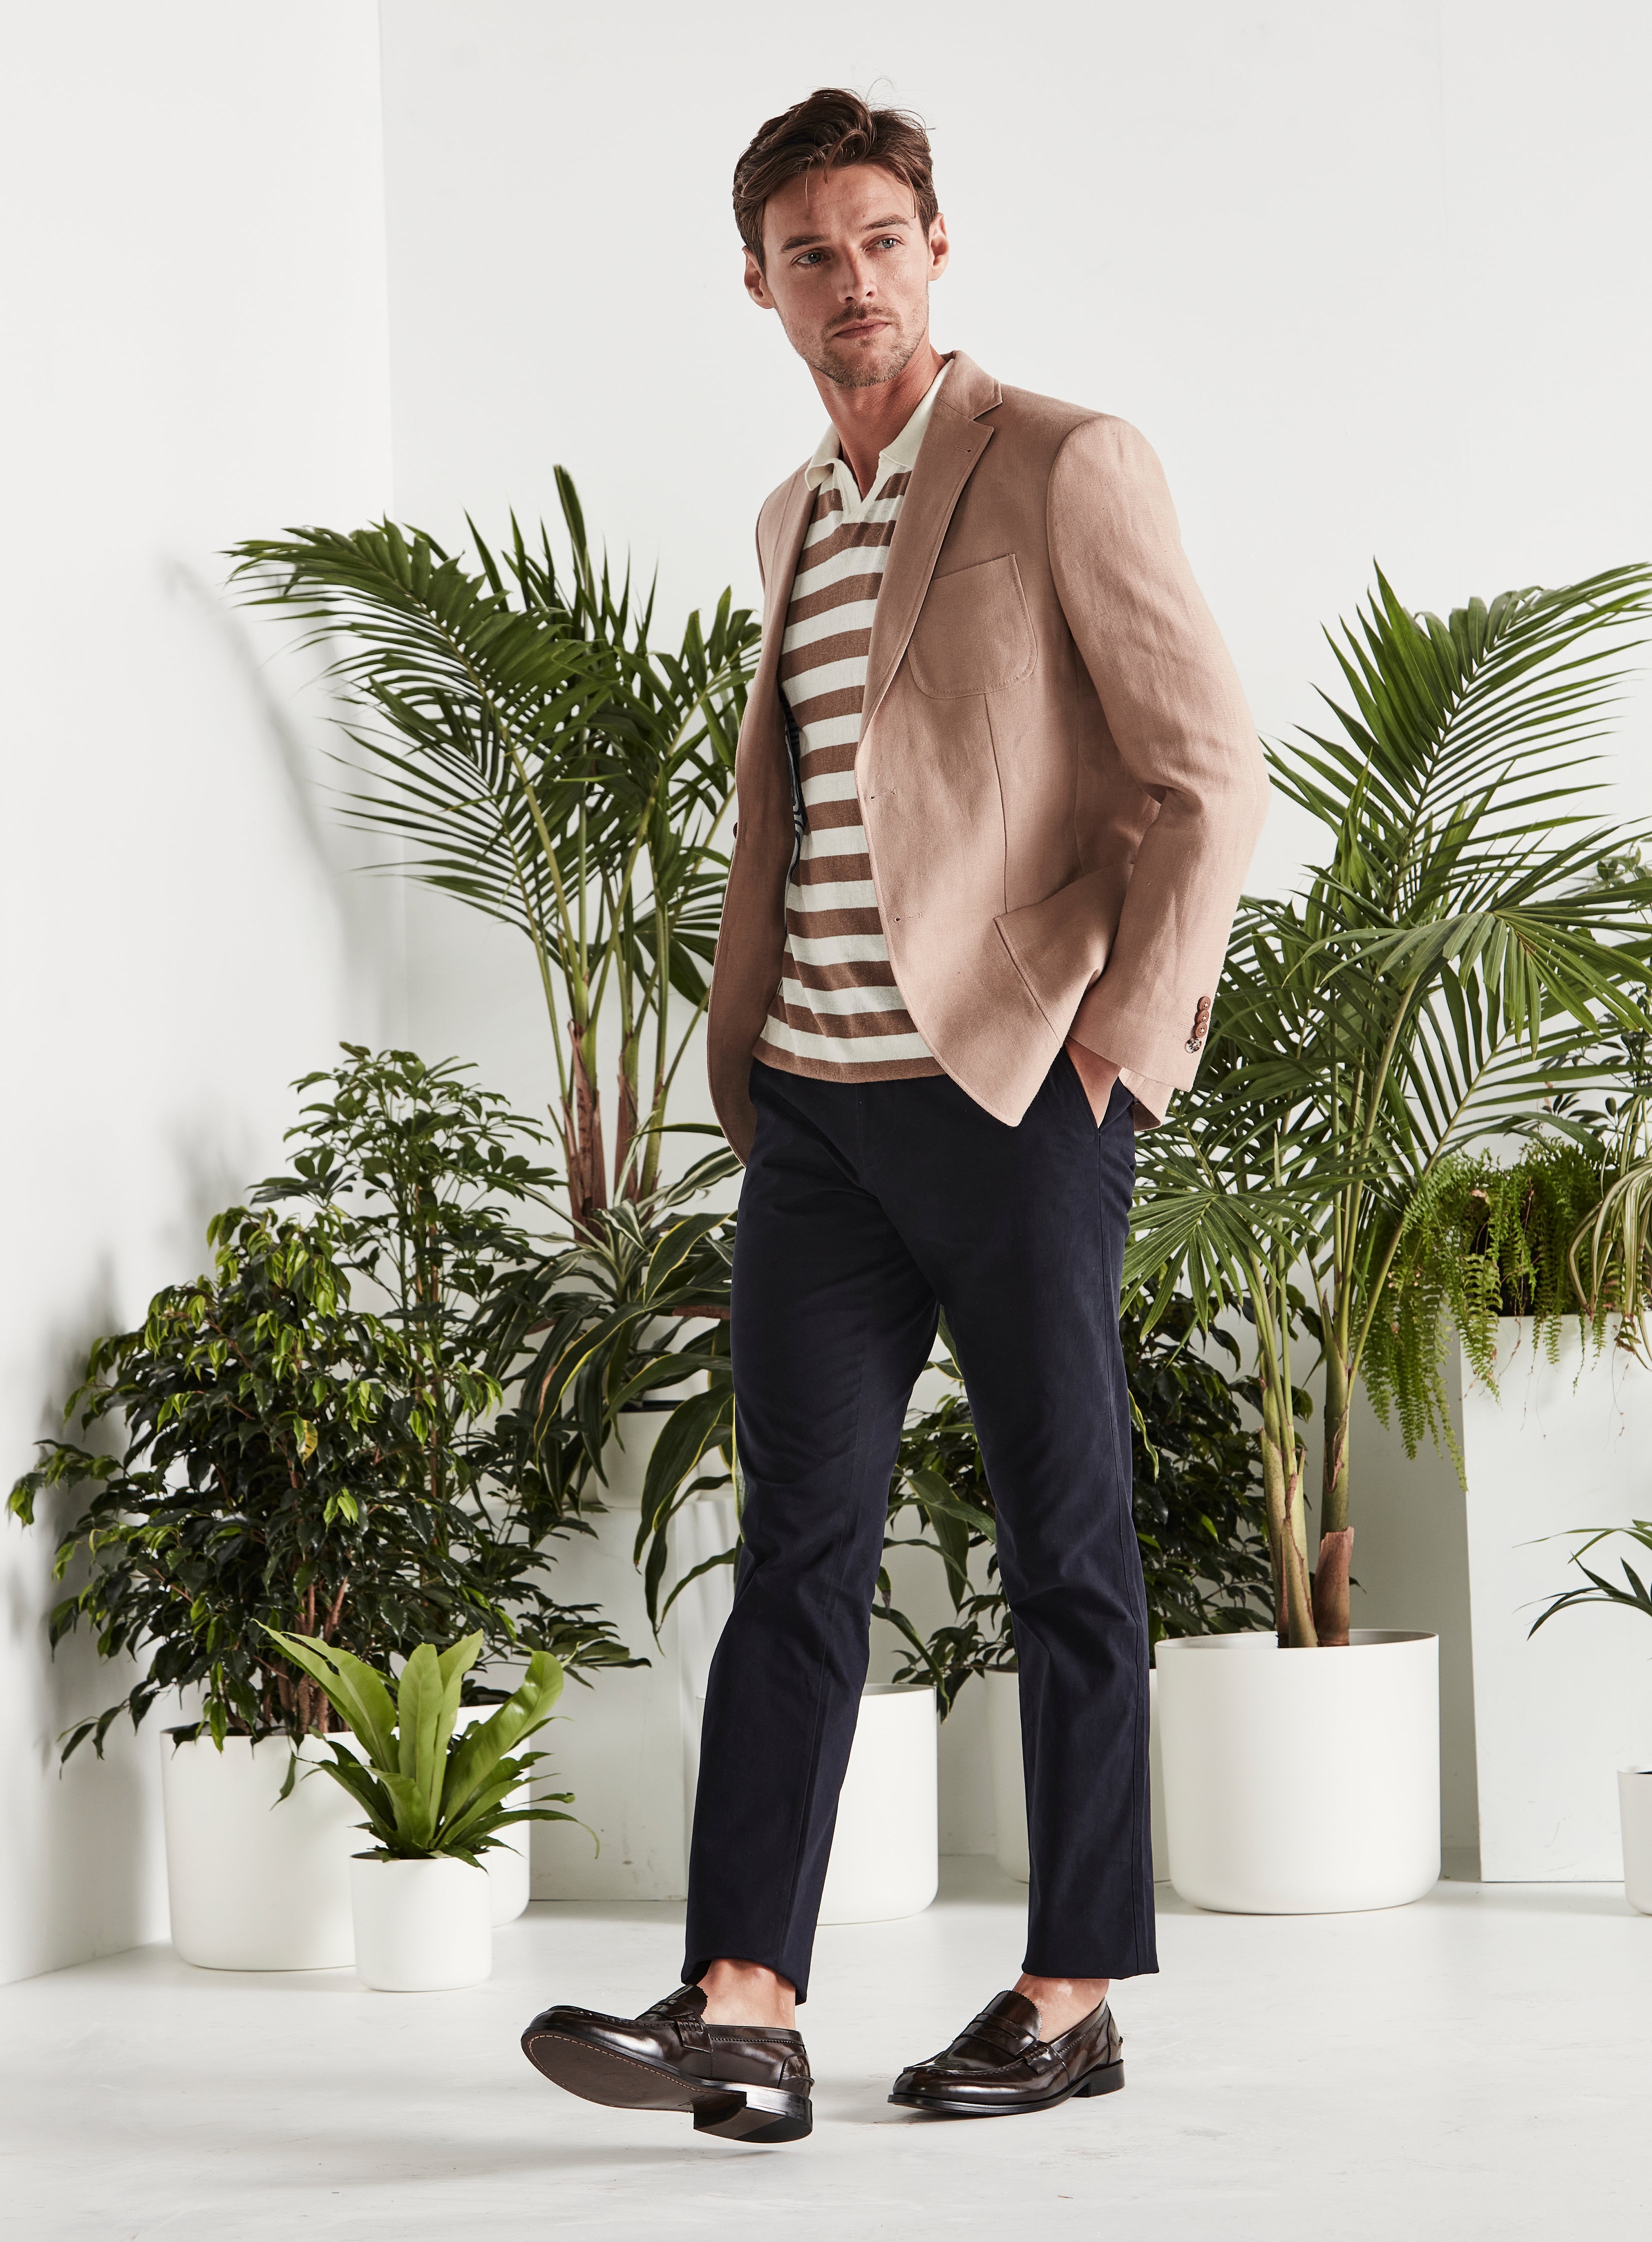 Pin on Men's Look of the Day